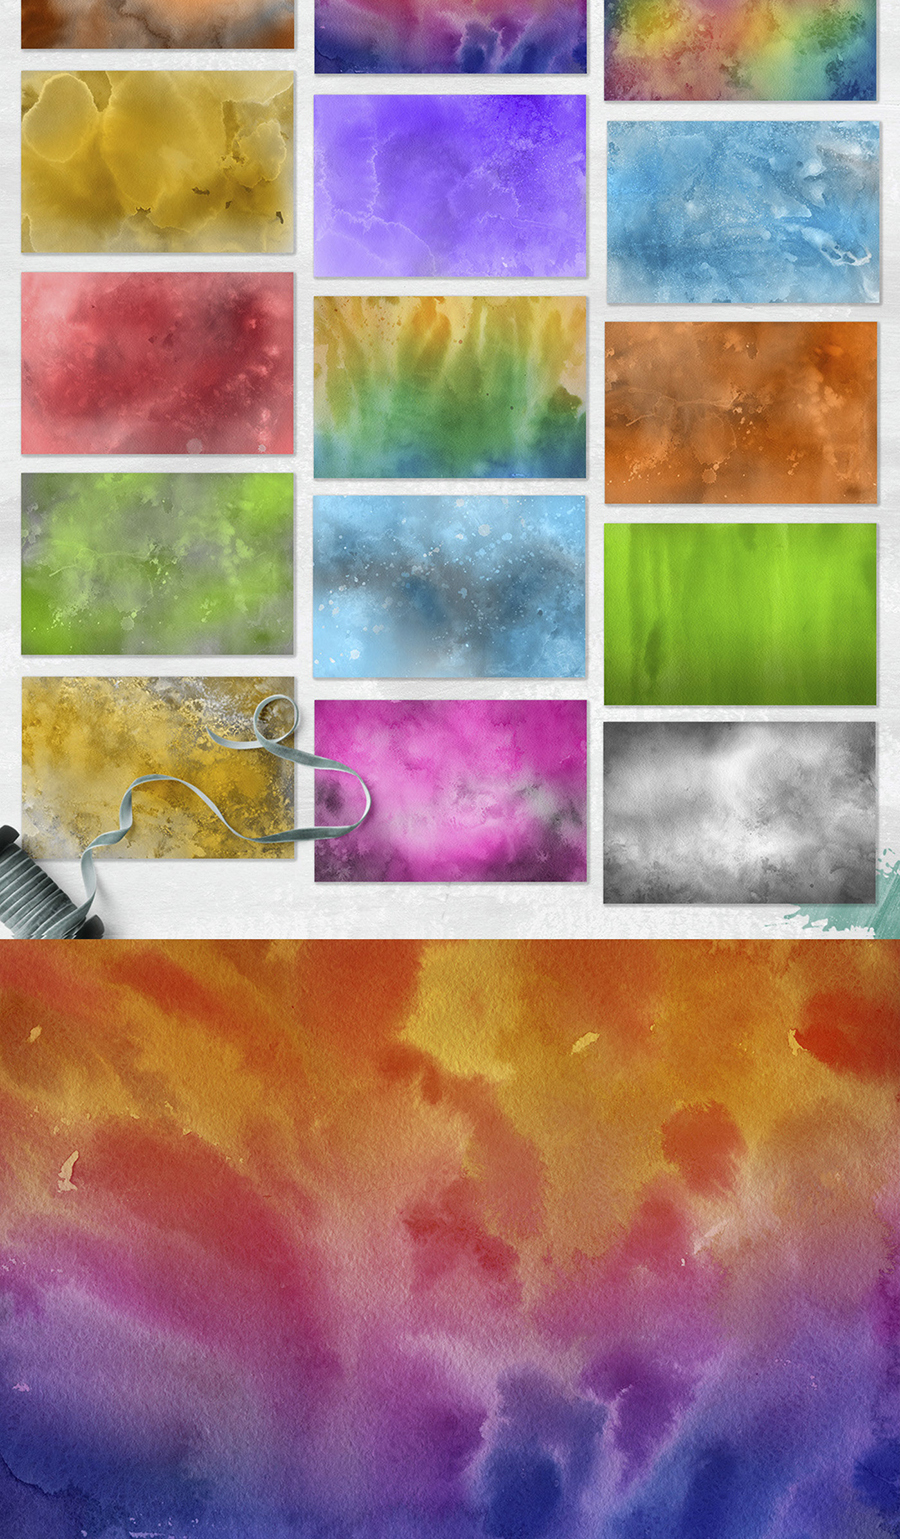 Watercolor Papers, Digital Papers Watercolor Background Textures